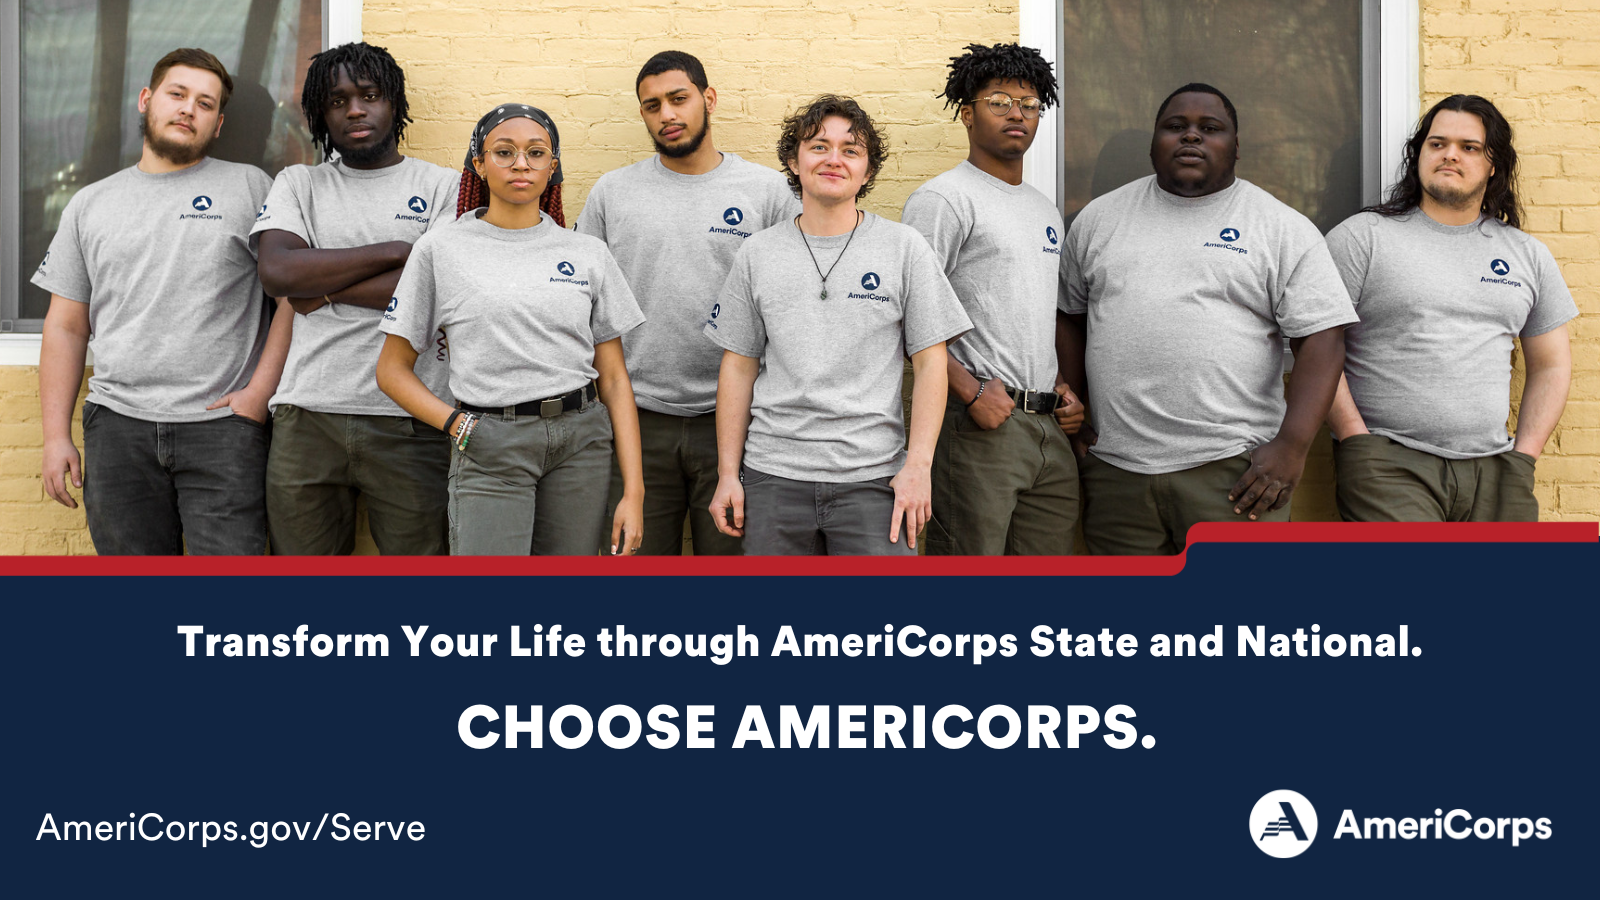 Transform Your Life through AmeriCorps State and National